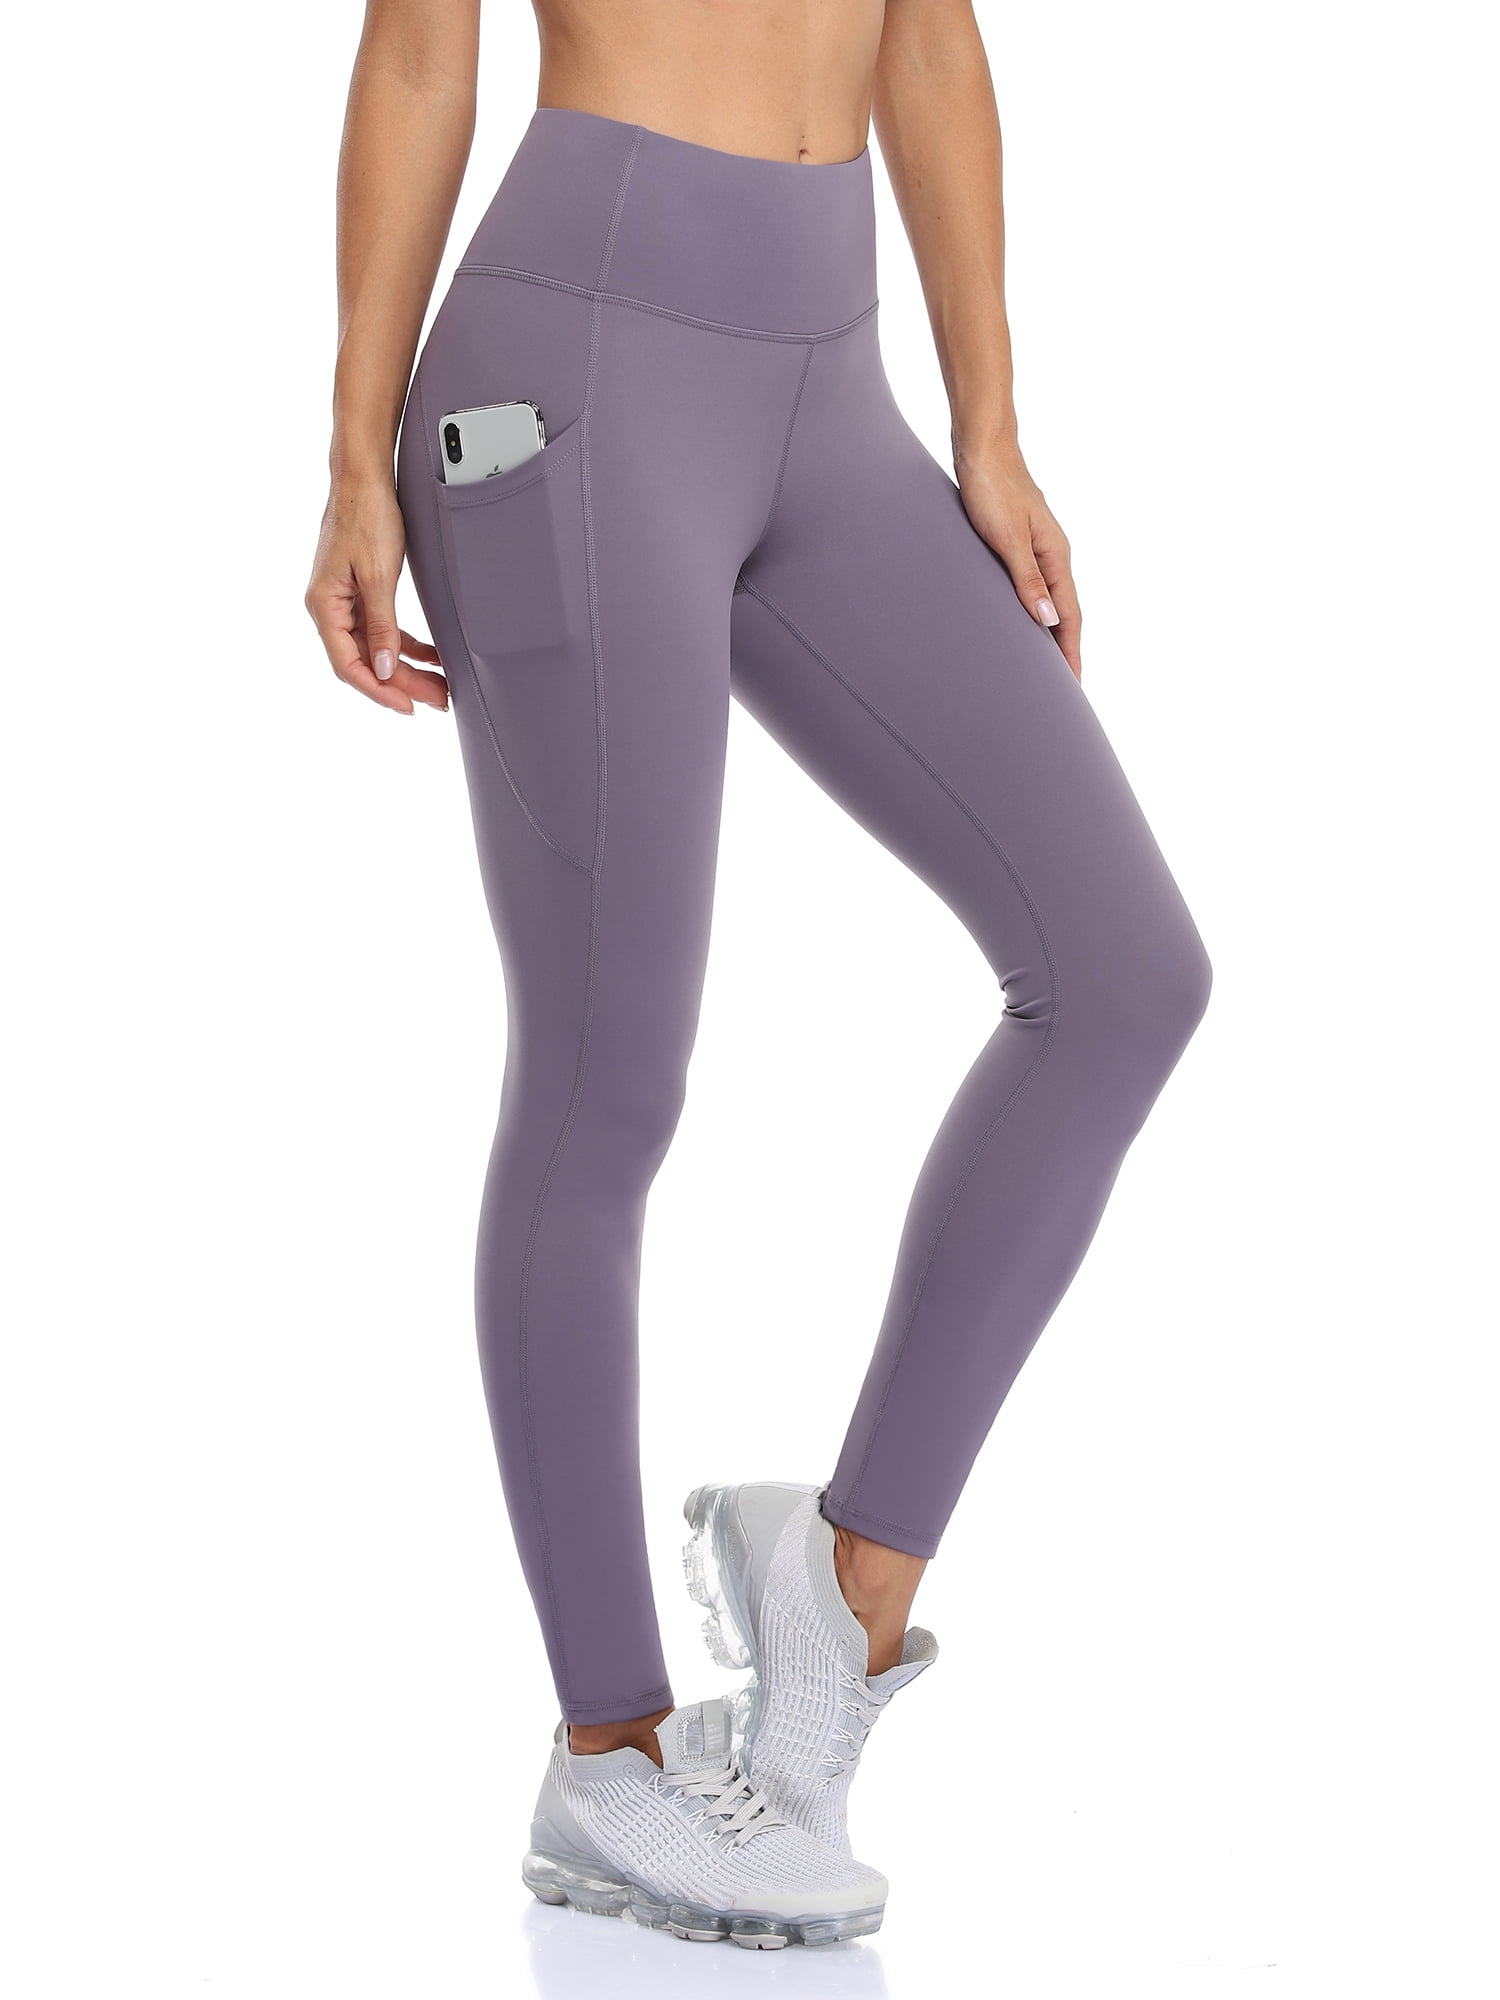  KT Buttery Soft Leggings for Women - High Waisted Leggings  Pants with Pockets - Reg & Plus Size : Clothing, Shoes & Jewelry